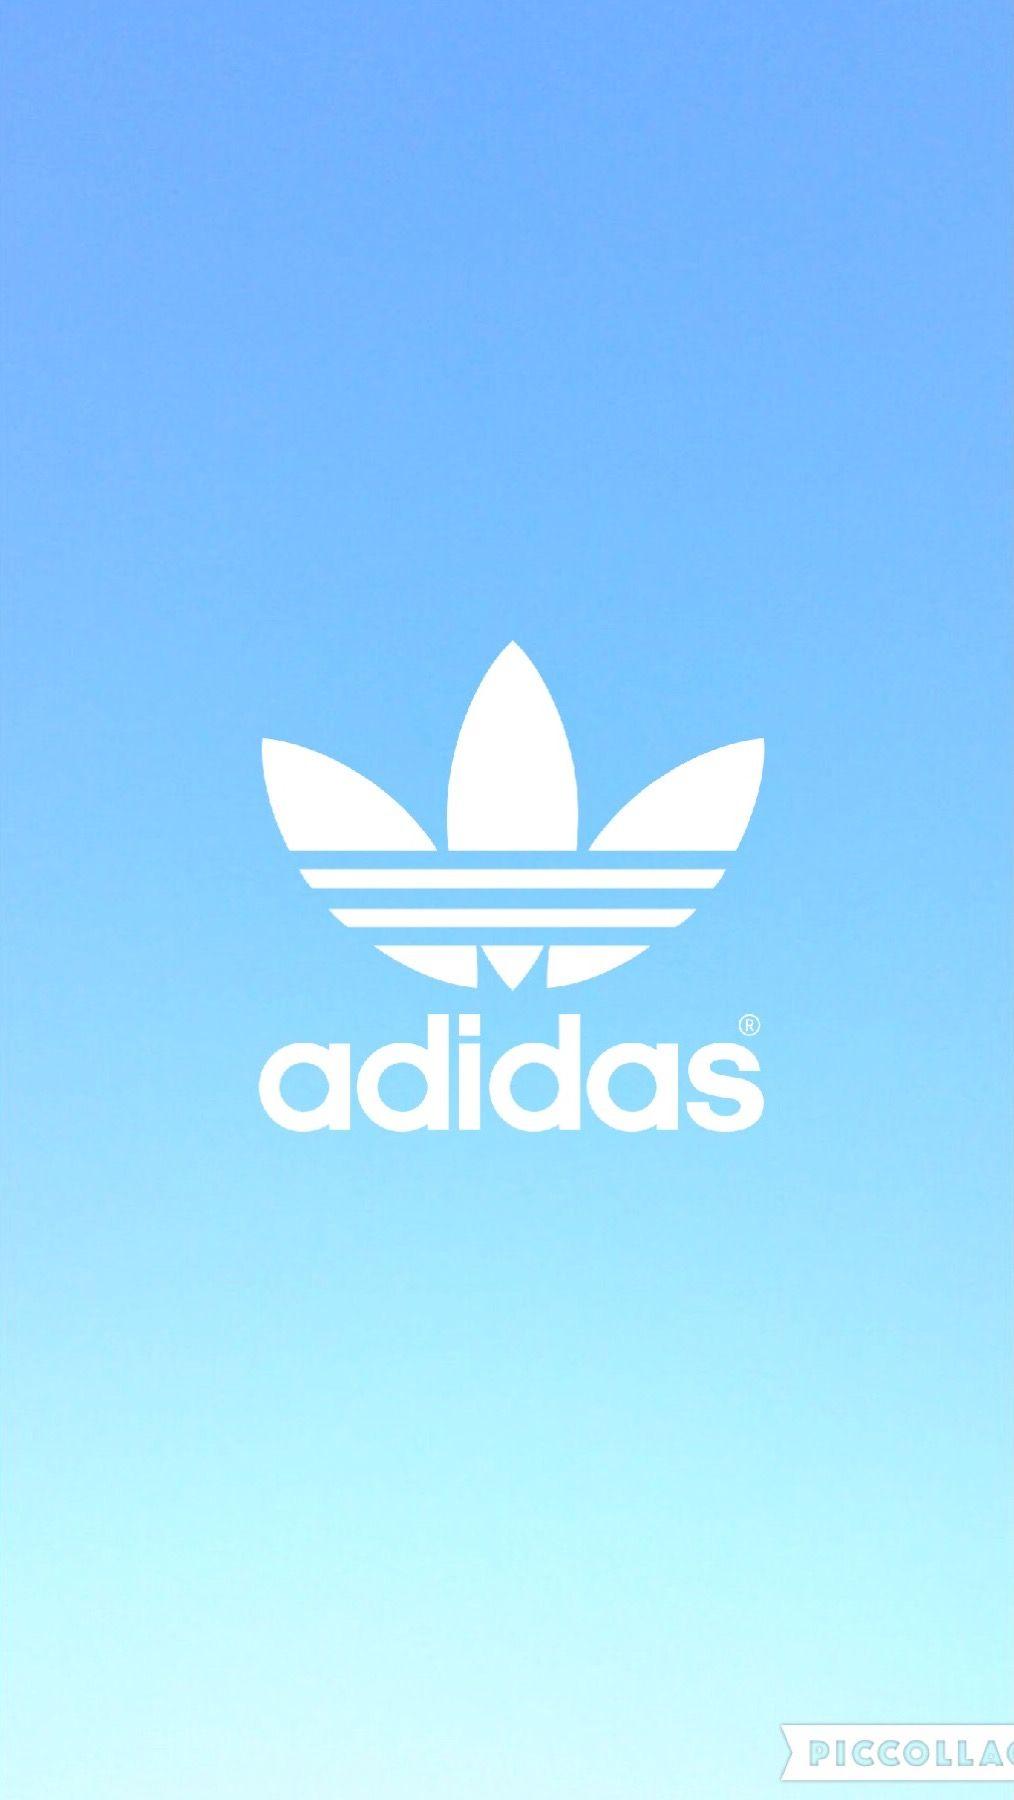 Adidas Aesthetic Wallpapers - Wallpaper Cave